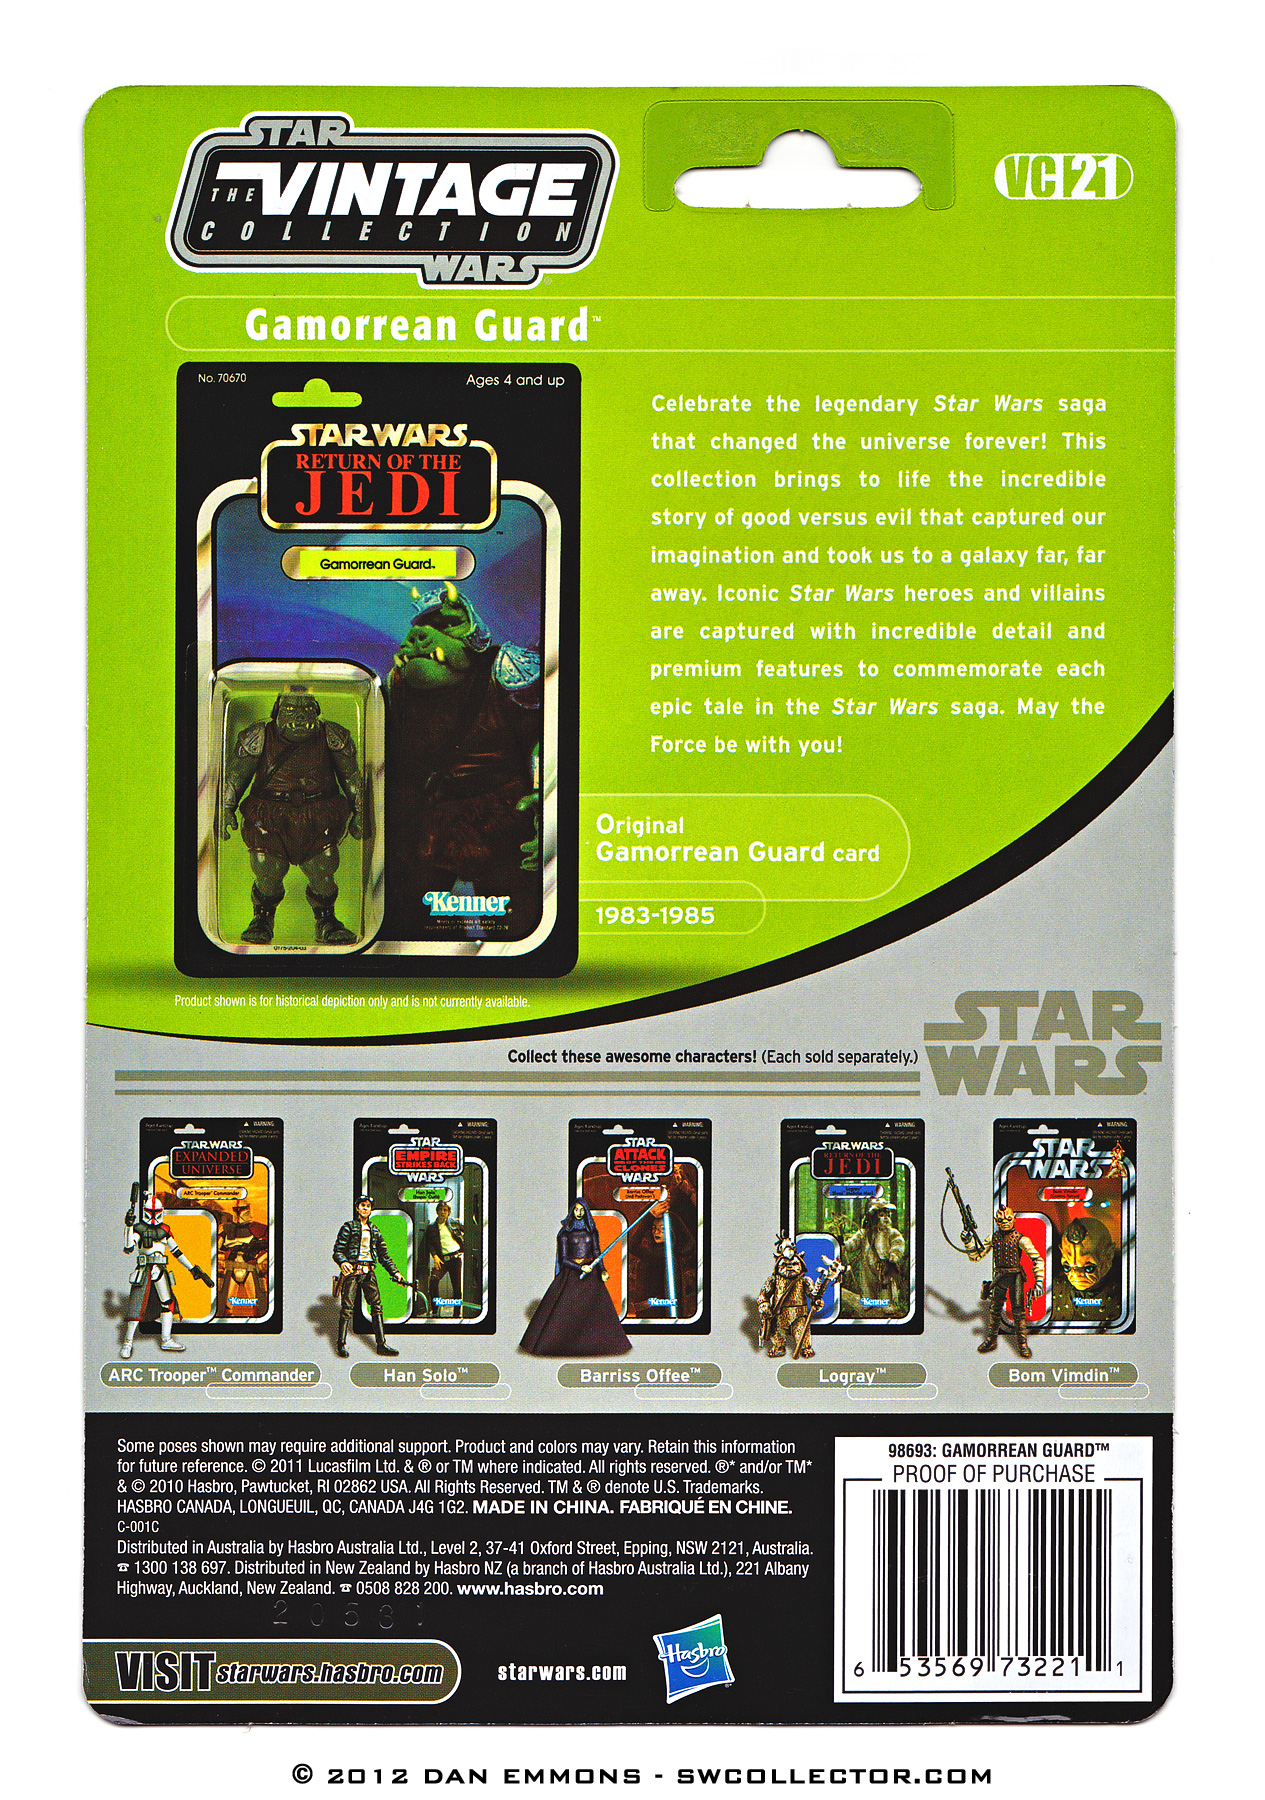 The Vintage Collection - VC21: Gamorrean Guard - Variation - Logos Removed From Bottom Of Card - New UPC